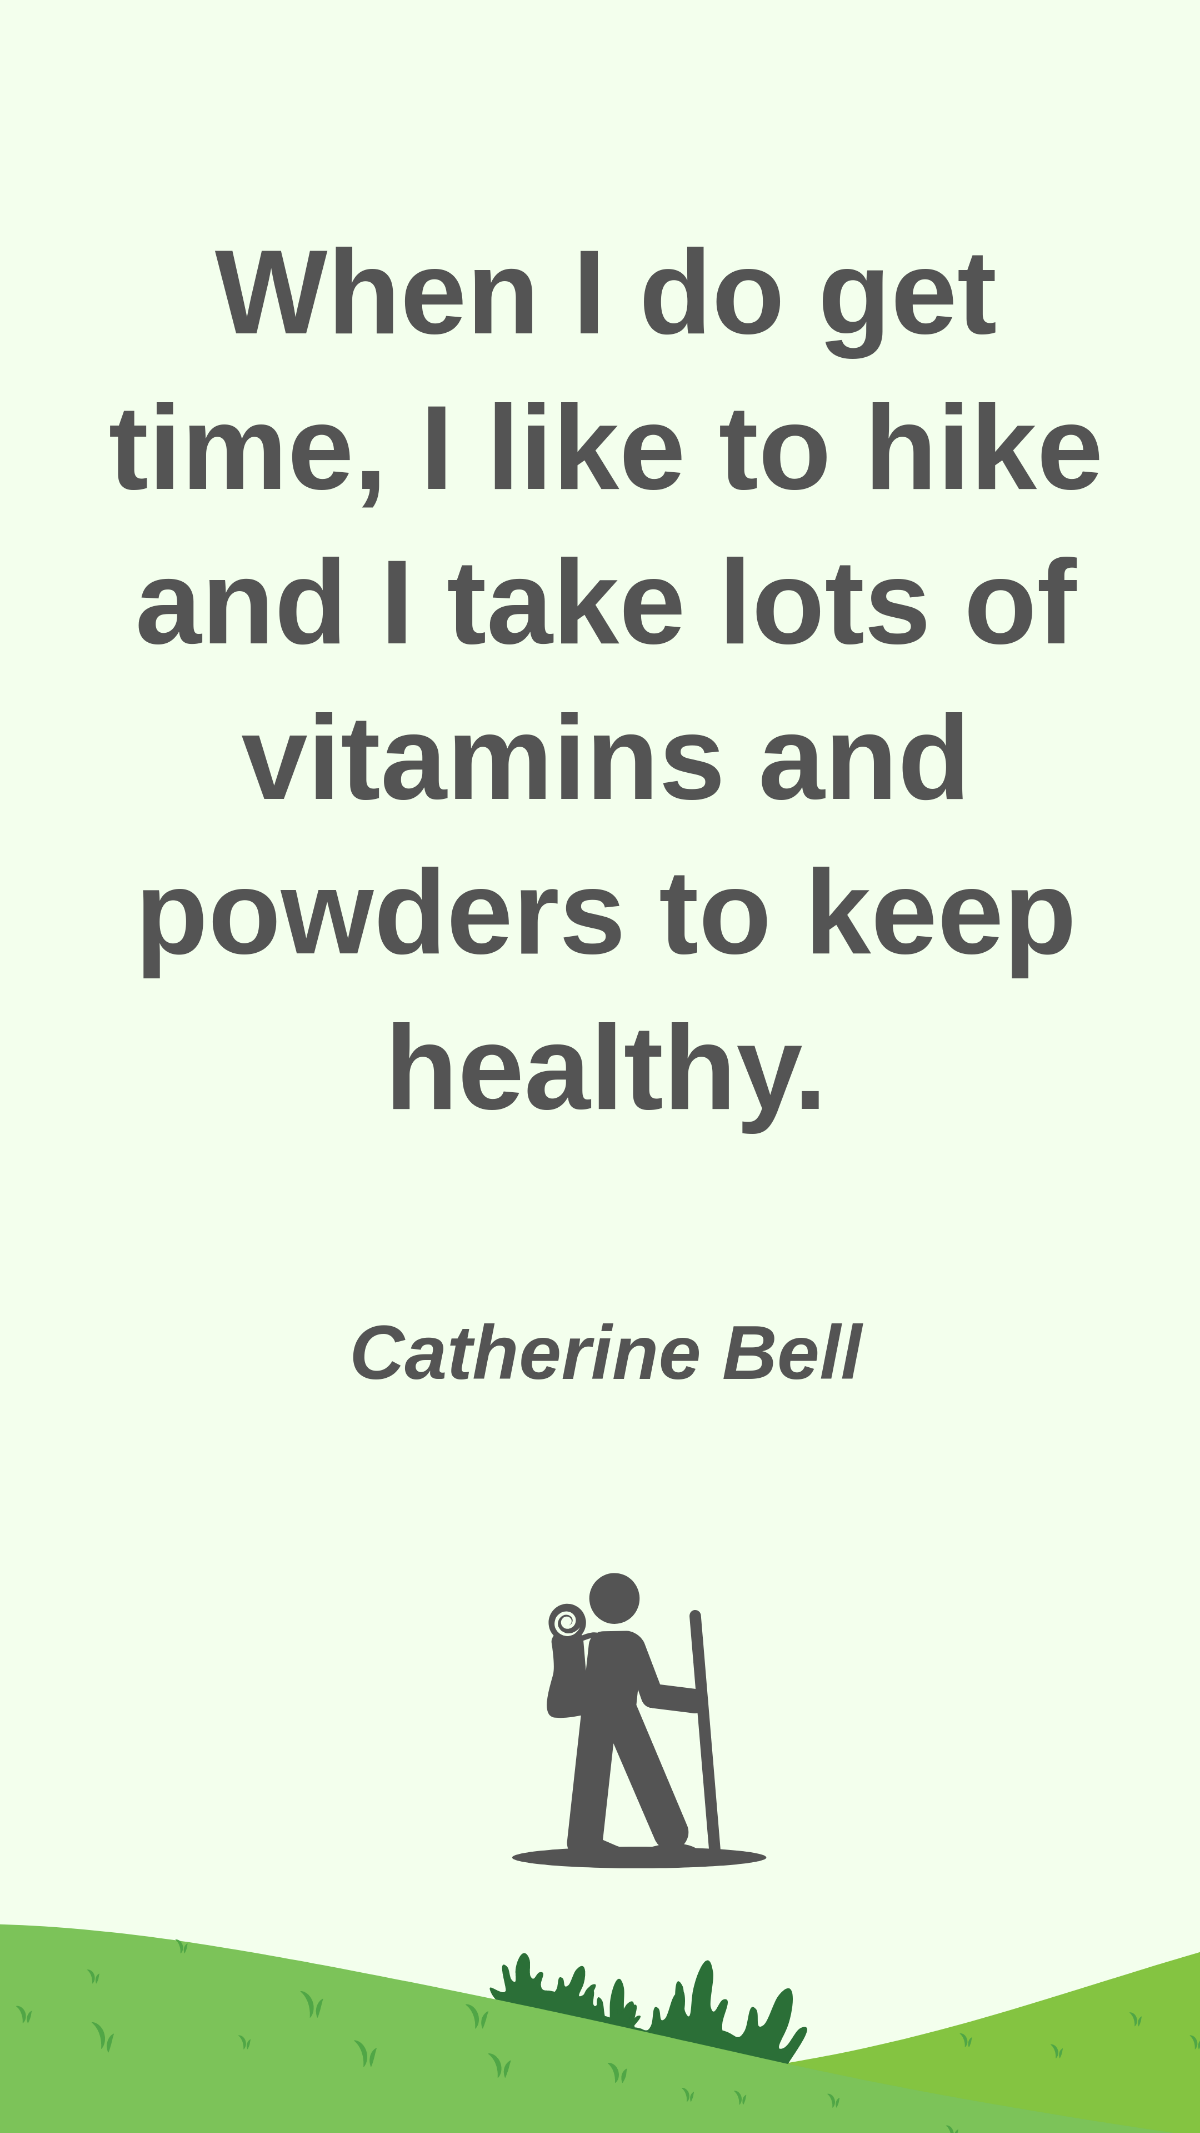 Catherine Bell - When I do get time, I like to hike and I take lots of vitamins and powders to keep healthy.